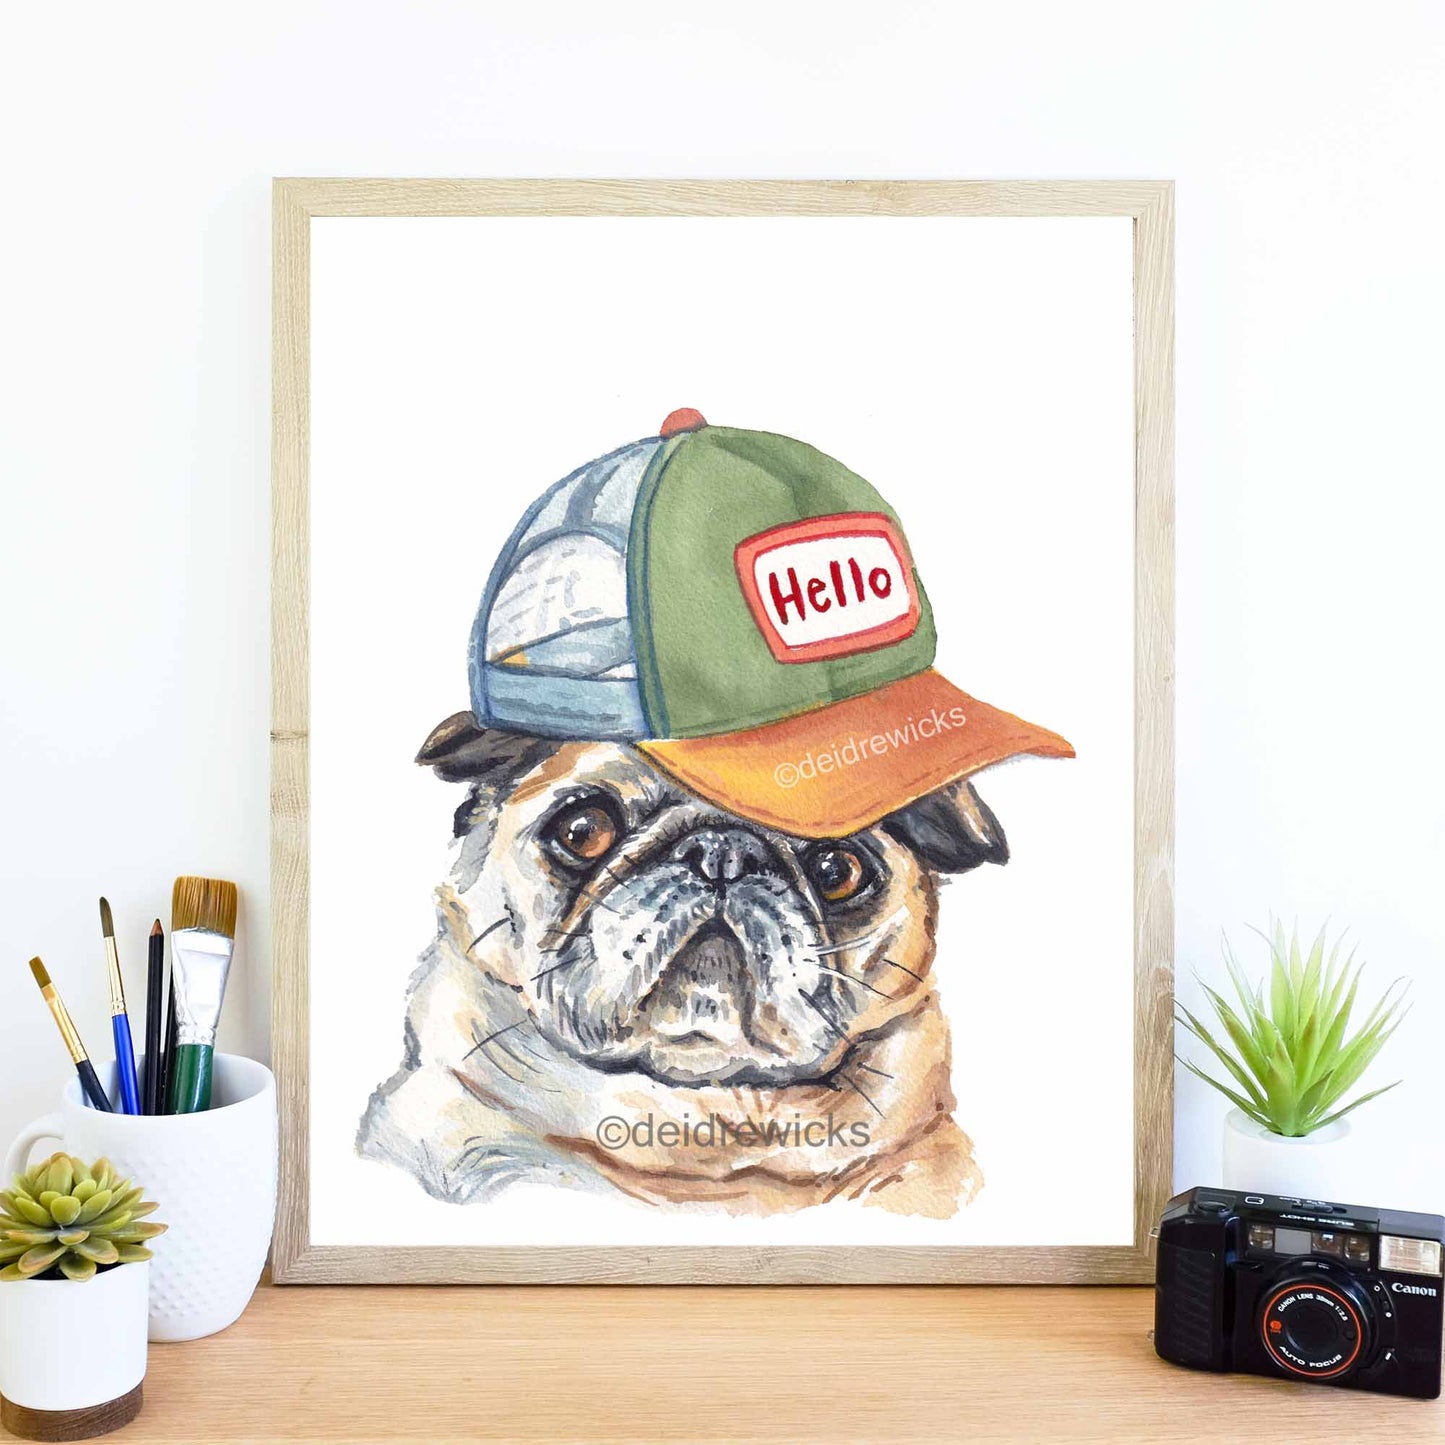 Suggested frame for a pug dog watercolor print by Deidre Wicks.